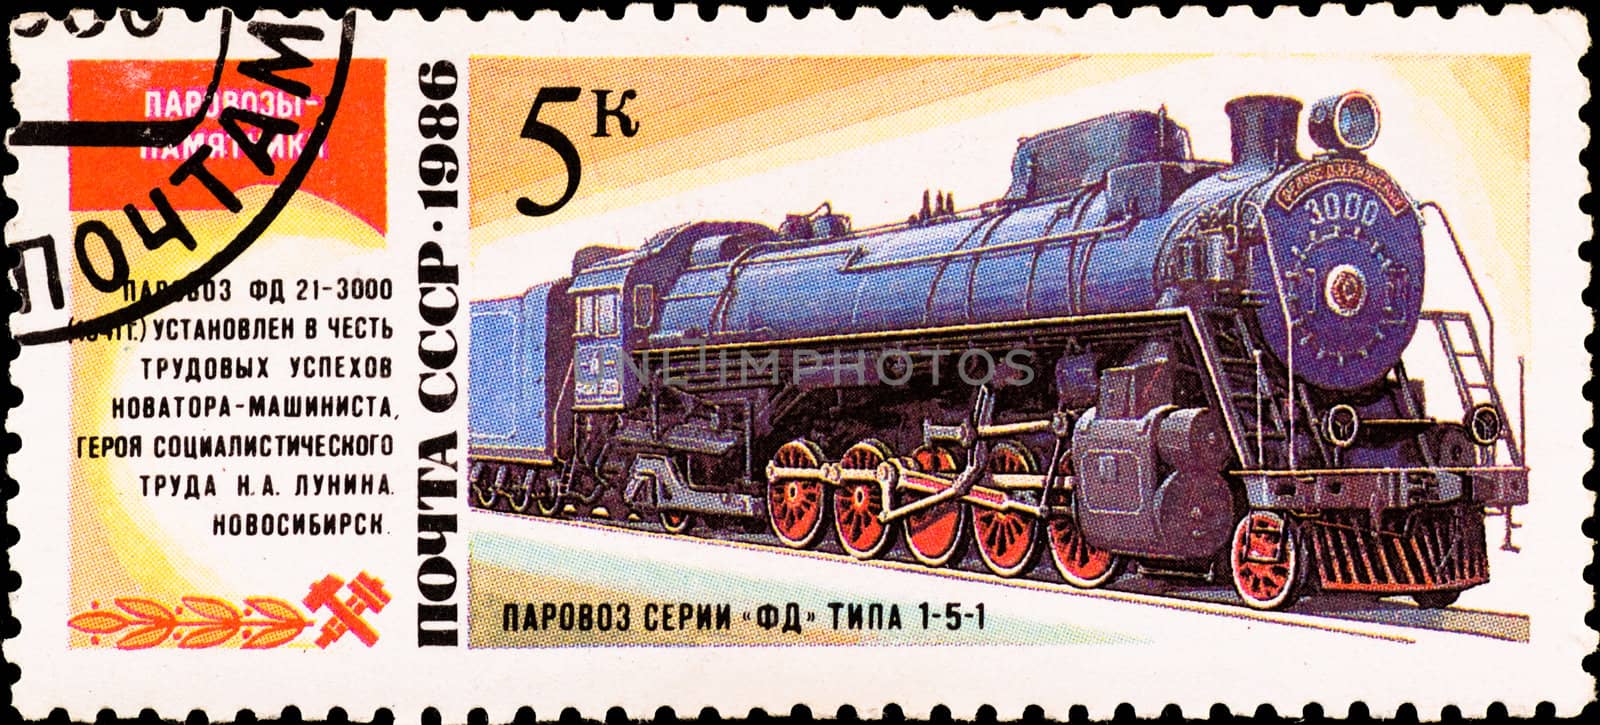 postage stamp shows russian train "FD-151" by petr_malyshev